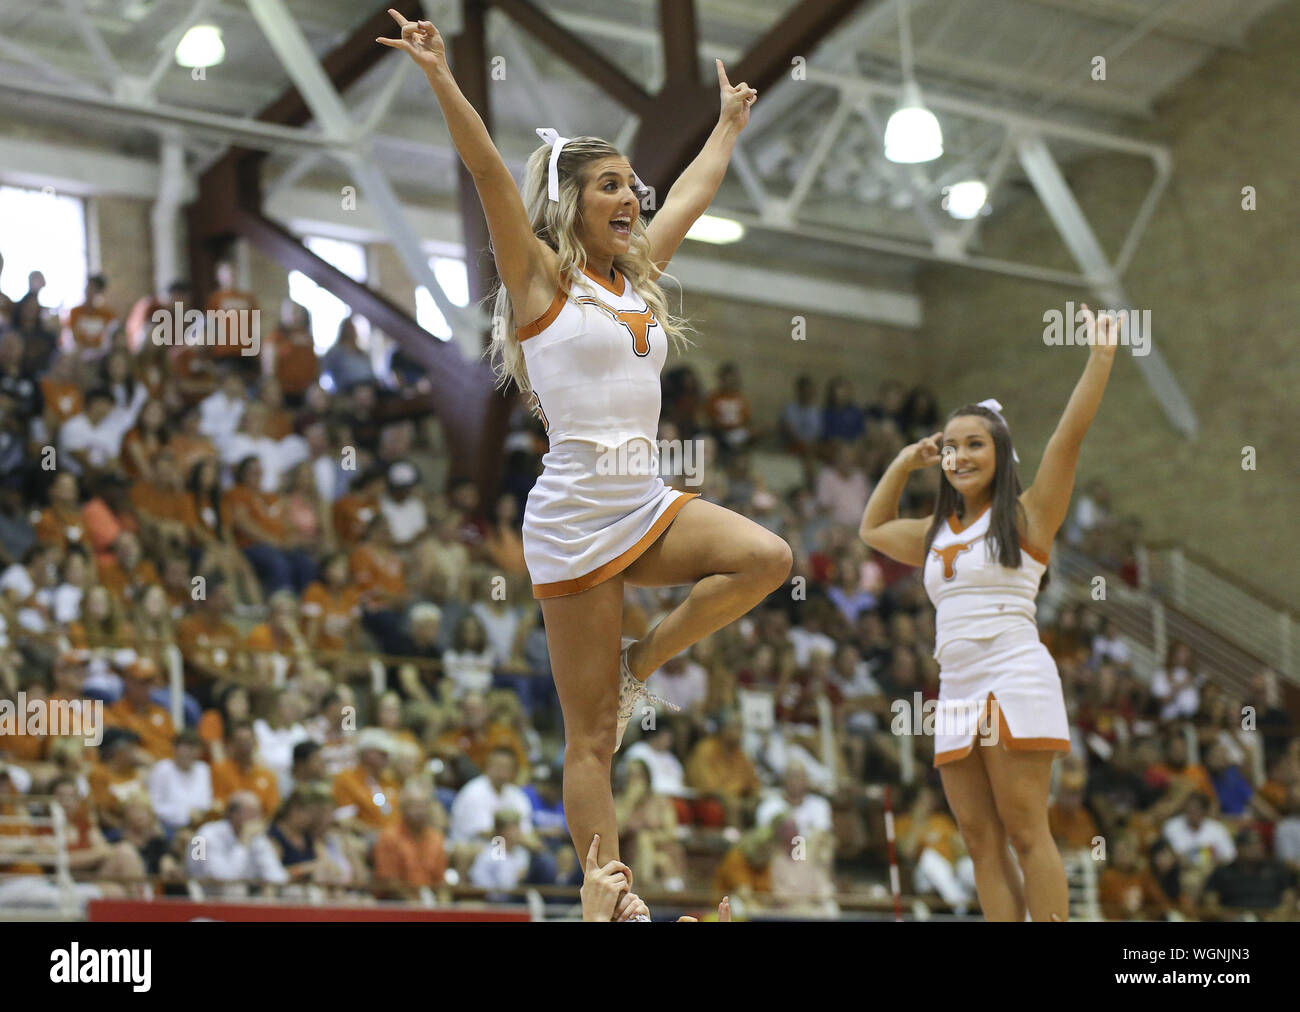 Austin, TX, USA. 1st Sep, 2019. The Texas Longhorns Cheerleaders during an NCAA volleyball match between the University of Texas and the University of Southern California at Gregory Gymnasium in Austin, Texas on September 1, 2019. Credit: Scott Coleman/ZUMA Wire/Alamy Live News Stock Photo